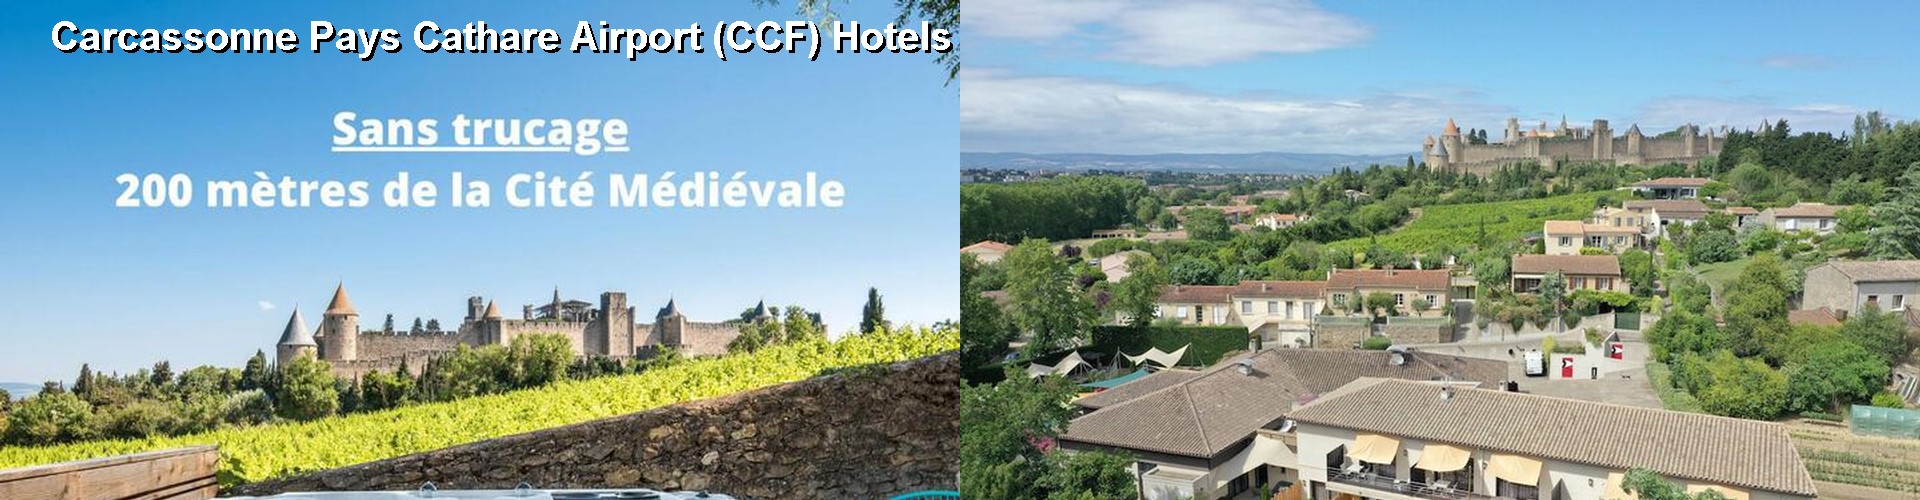 5 Best Hotels near Carcassonne Pays Cathare Airport (CCF)